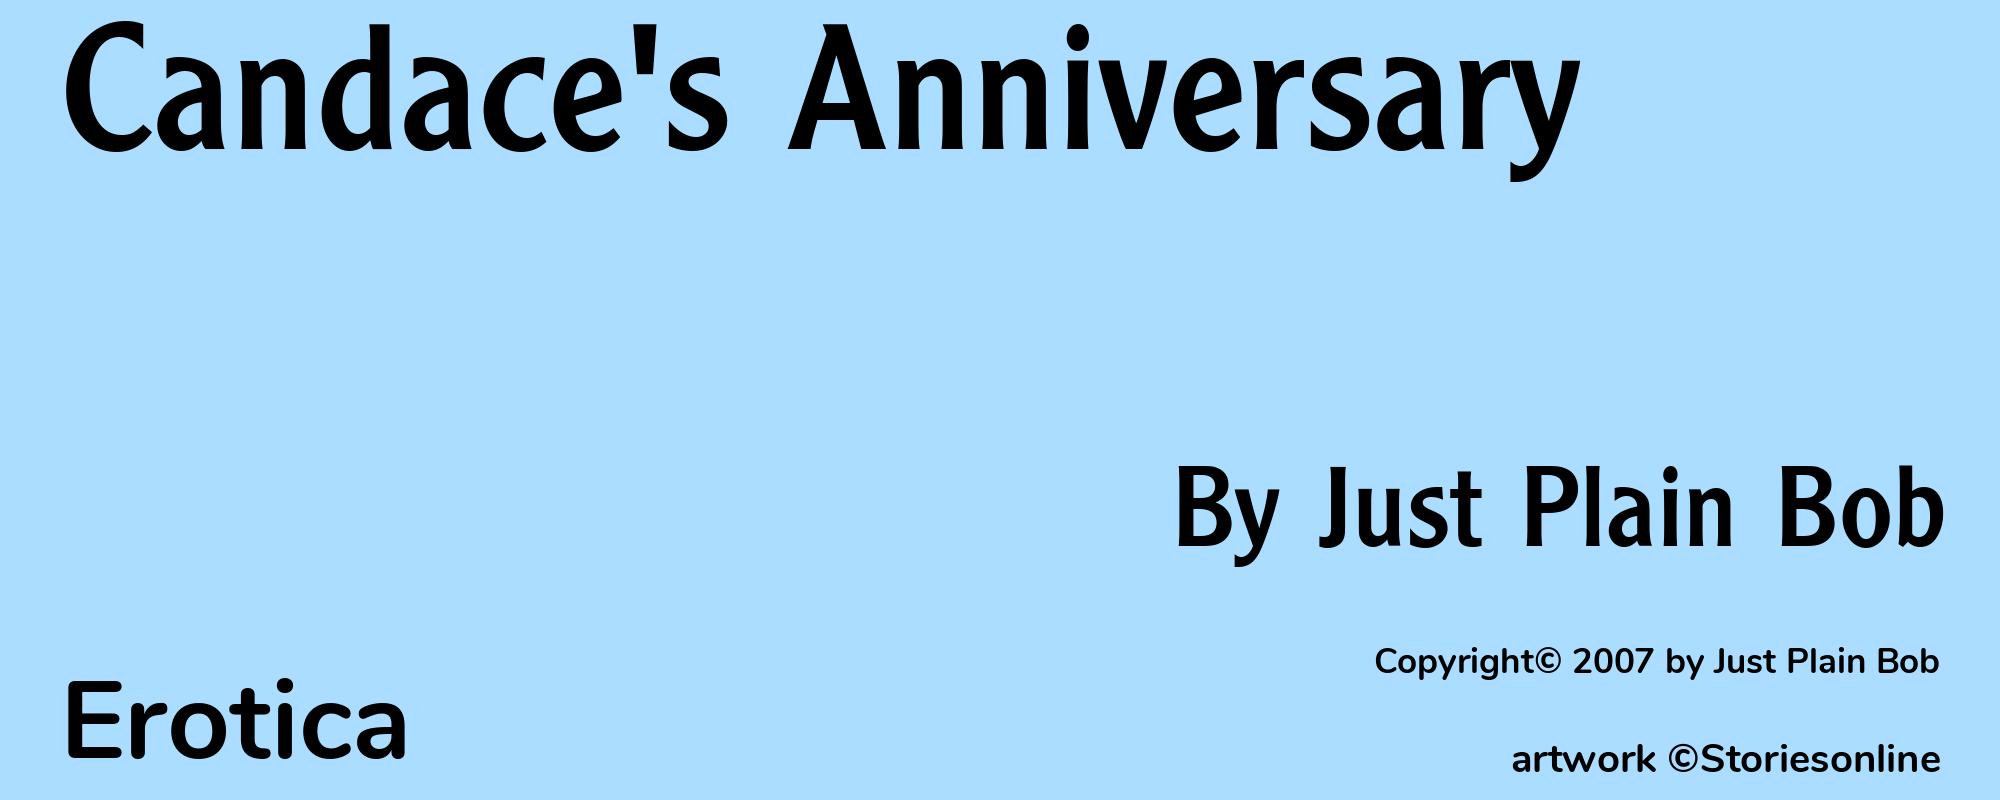 Candace's Anniversary - Cover